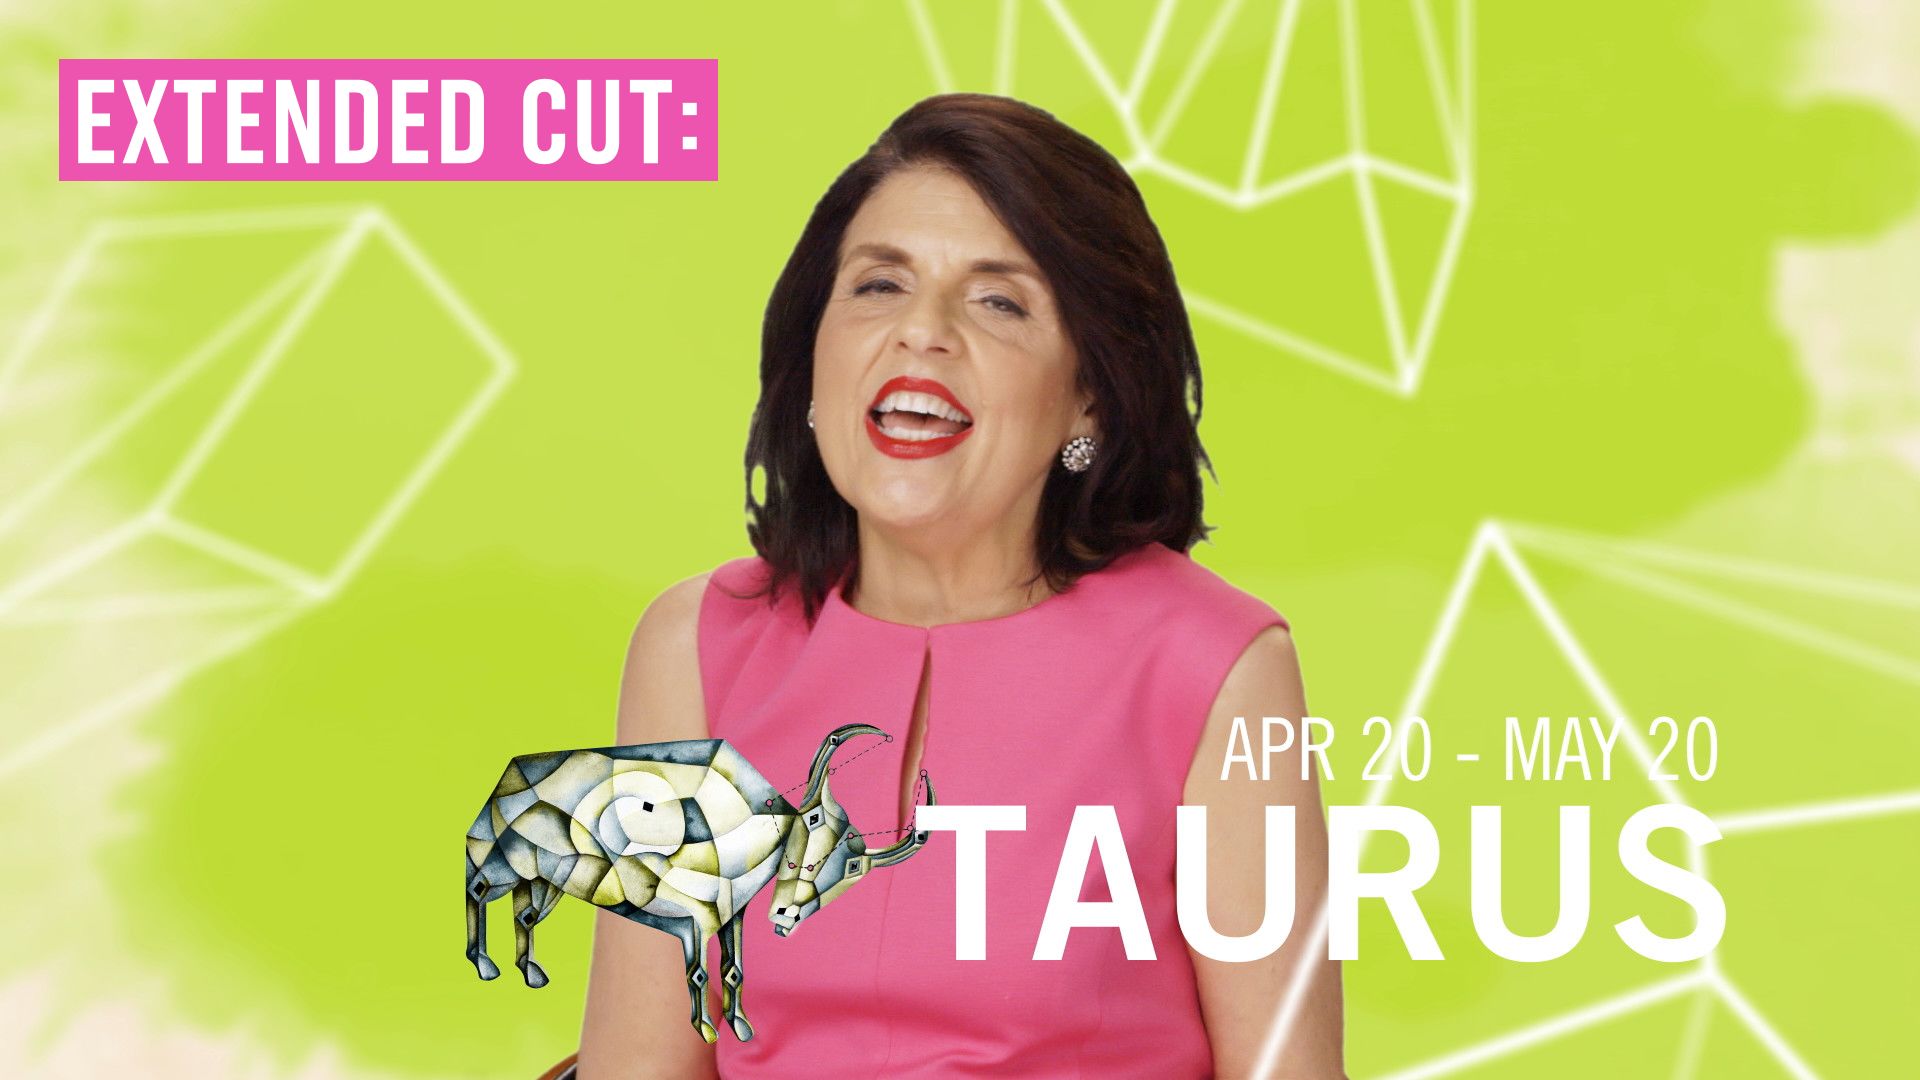 Watch Taurus Full Horoscope for 2015 Extended Cut Glamourscopes with